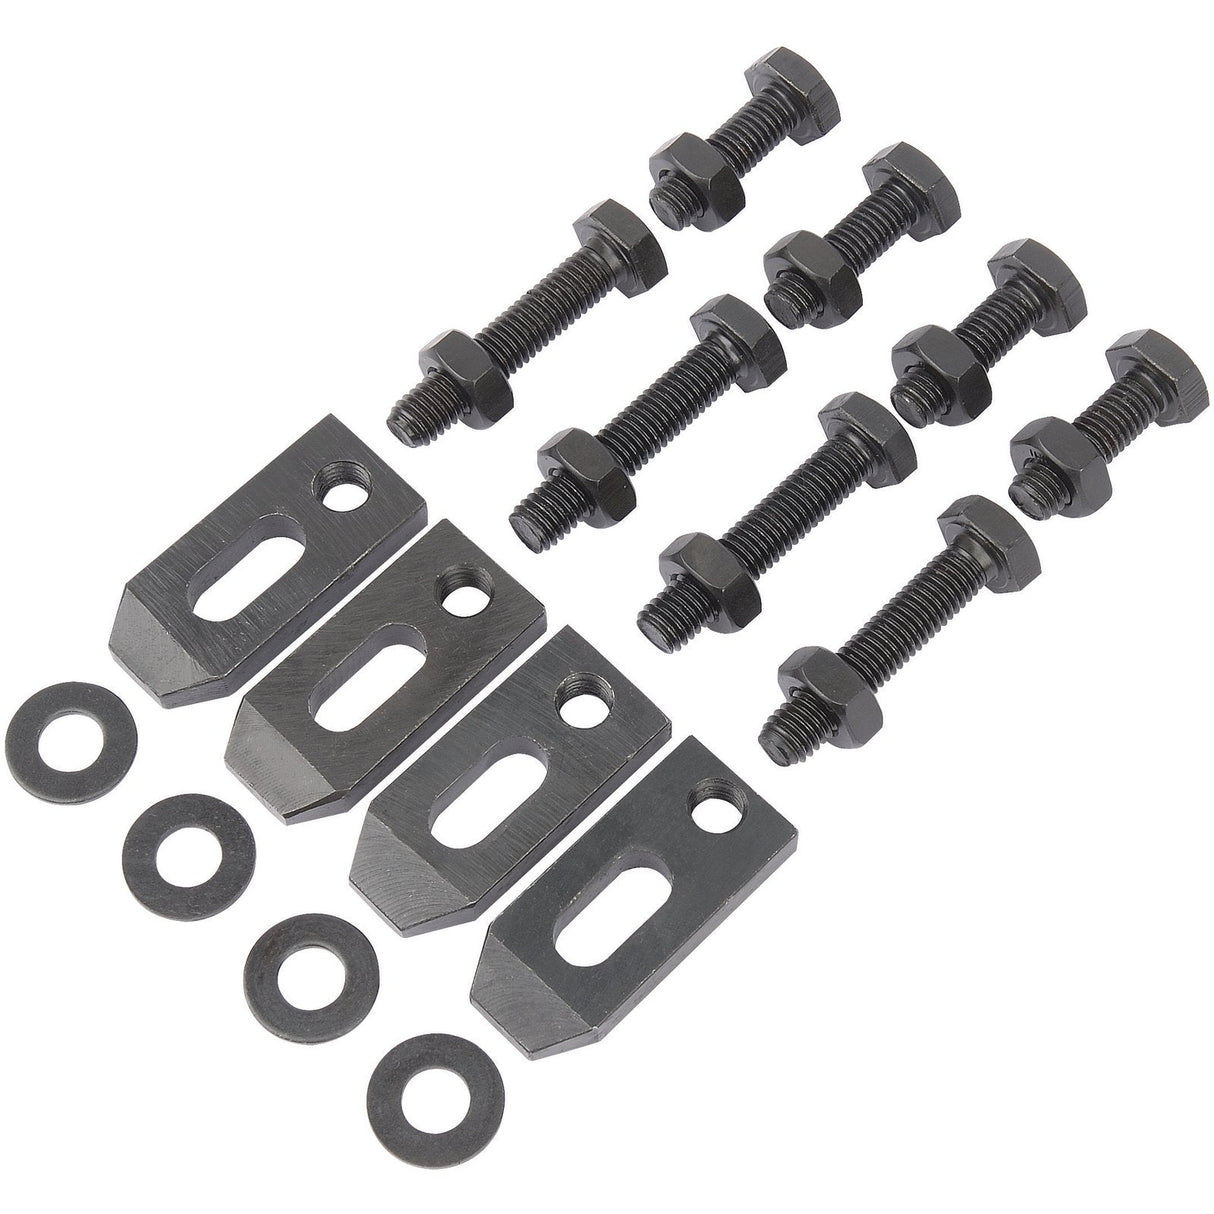 Draper Clamping Kit For Face Plate For Use With Stock No. 06901 And 33893 (16 Piece) - LATHE300-03 - Farming Parts